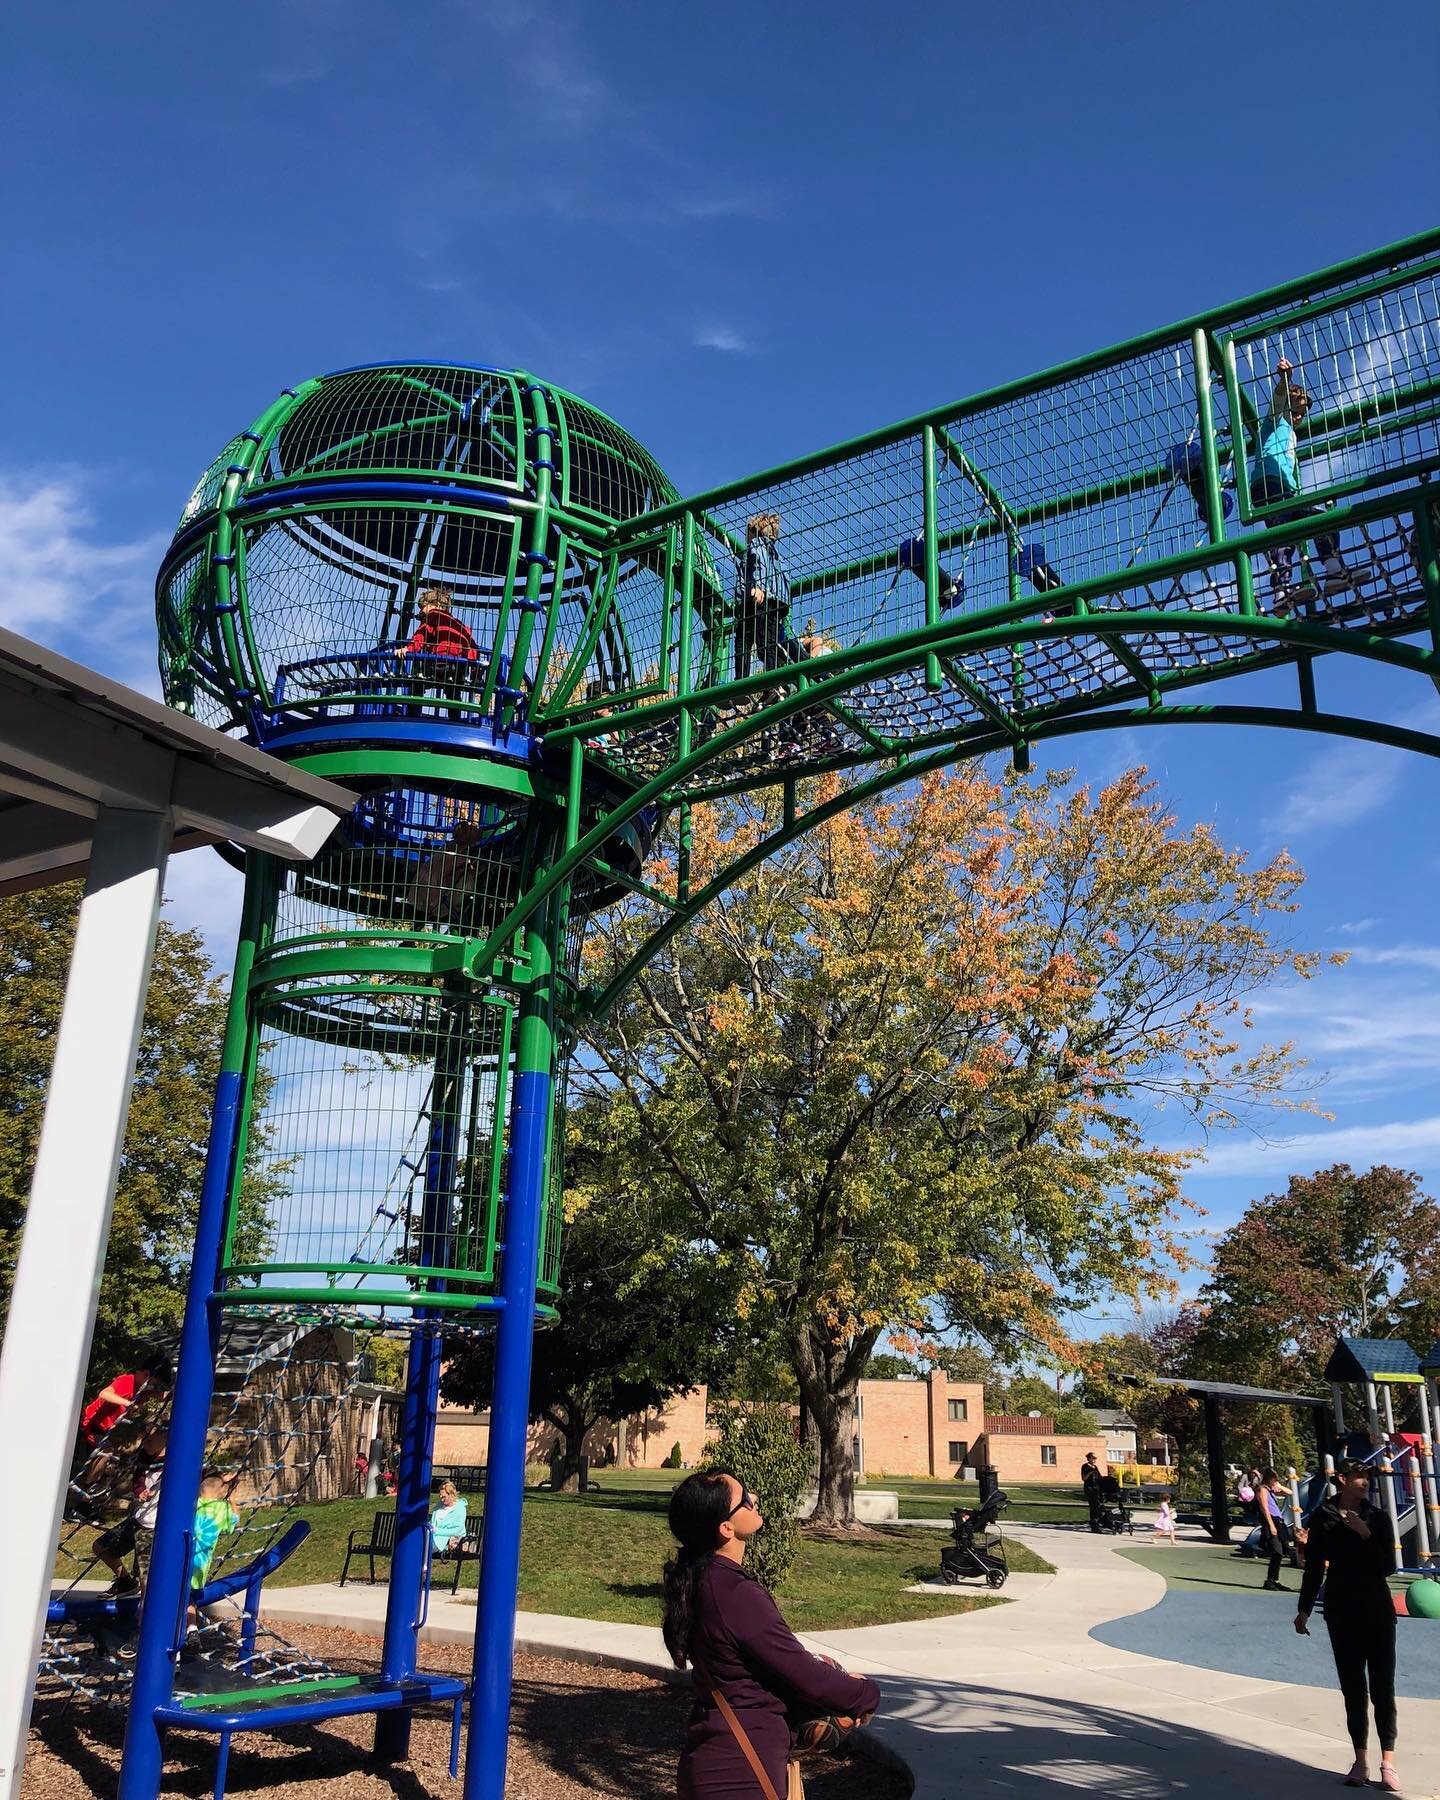 This summer join us for Park Playdates on the first and third Wednesday of every month, hosted by Restoration families at their kids&rsquo; favorite local parks!

May 3, 3:30-5:00pm &mdash; Burning Bush Trails Park (1313 N Burning Bush Ln, Mt Prospec